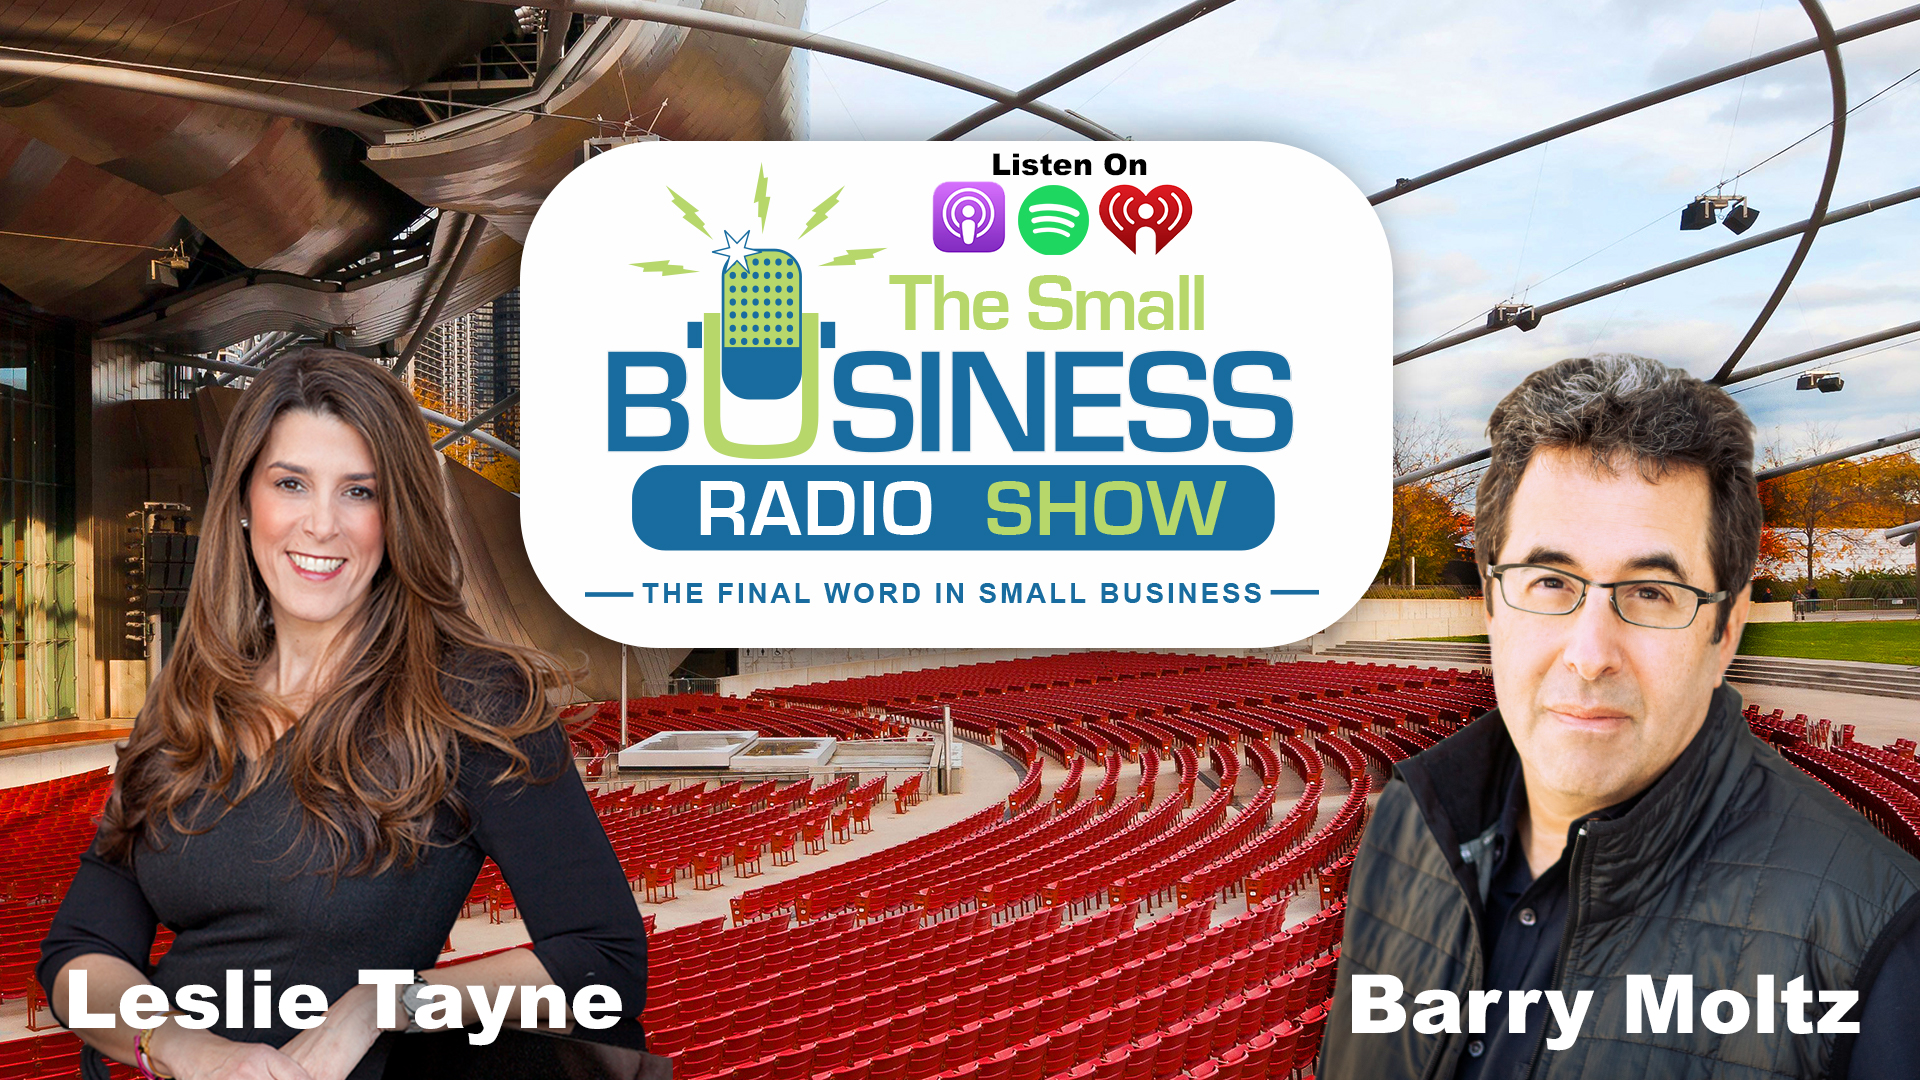 Leslie Tayne on The Small Business Radio Show